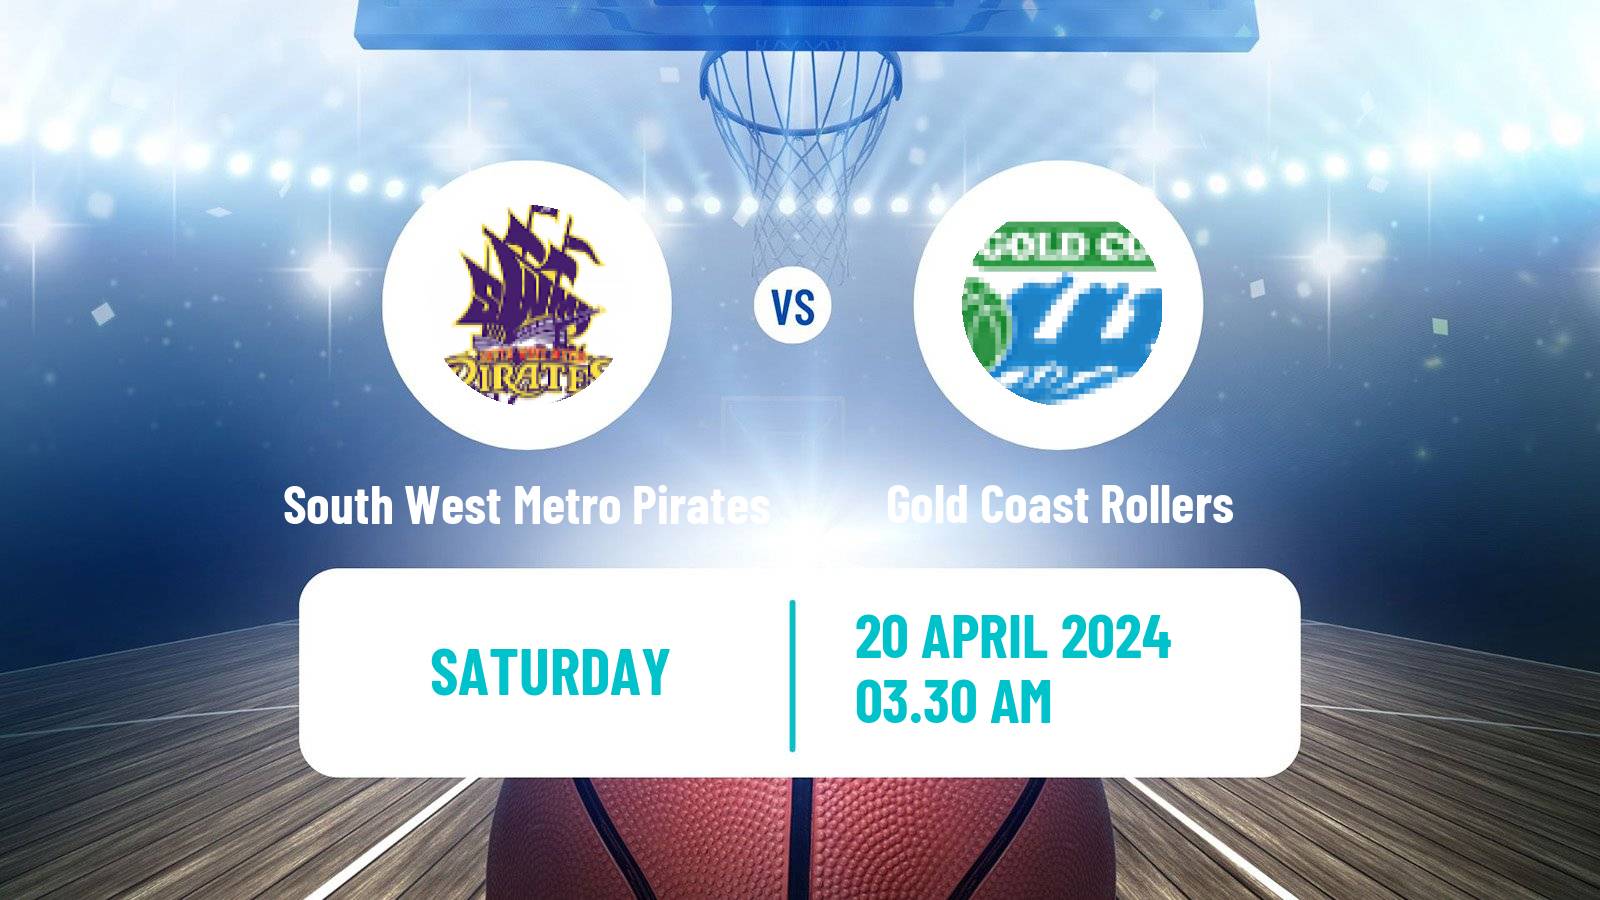 Basketball Australian NBL1 North Women South West Metro Pirates - Gold Coast Rollers